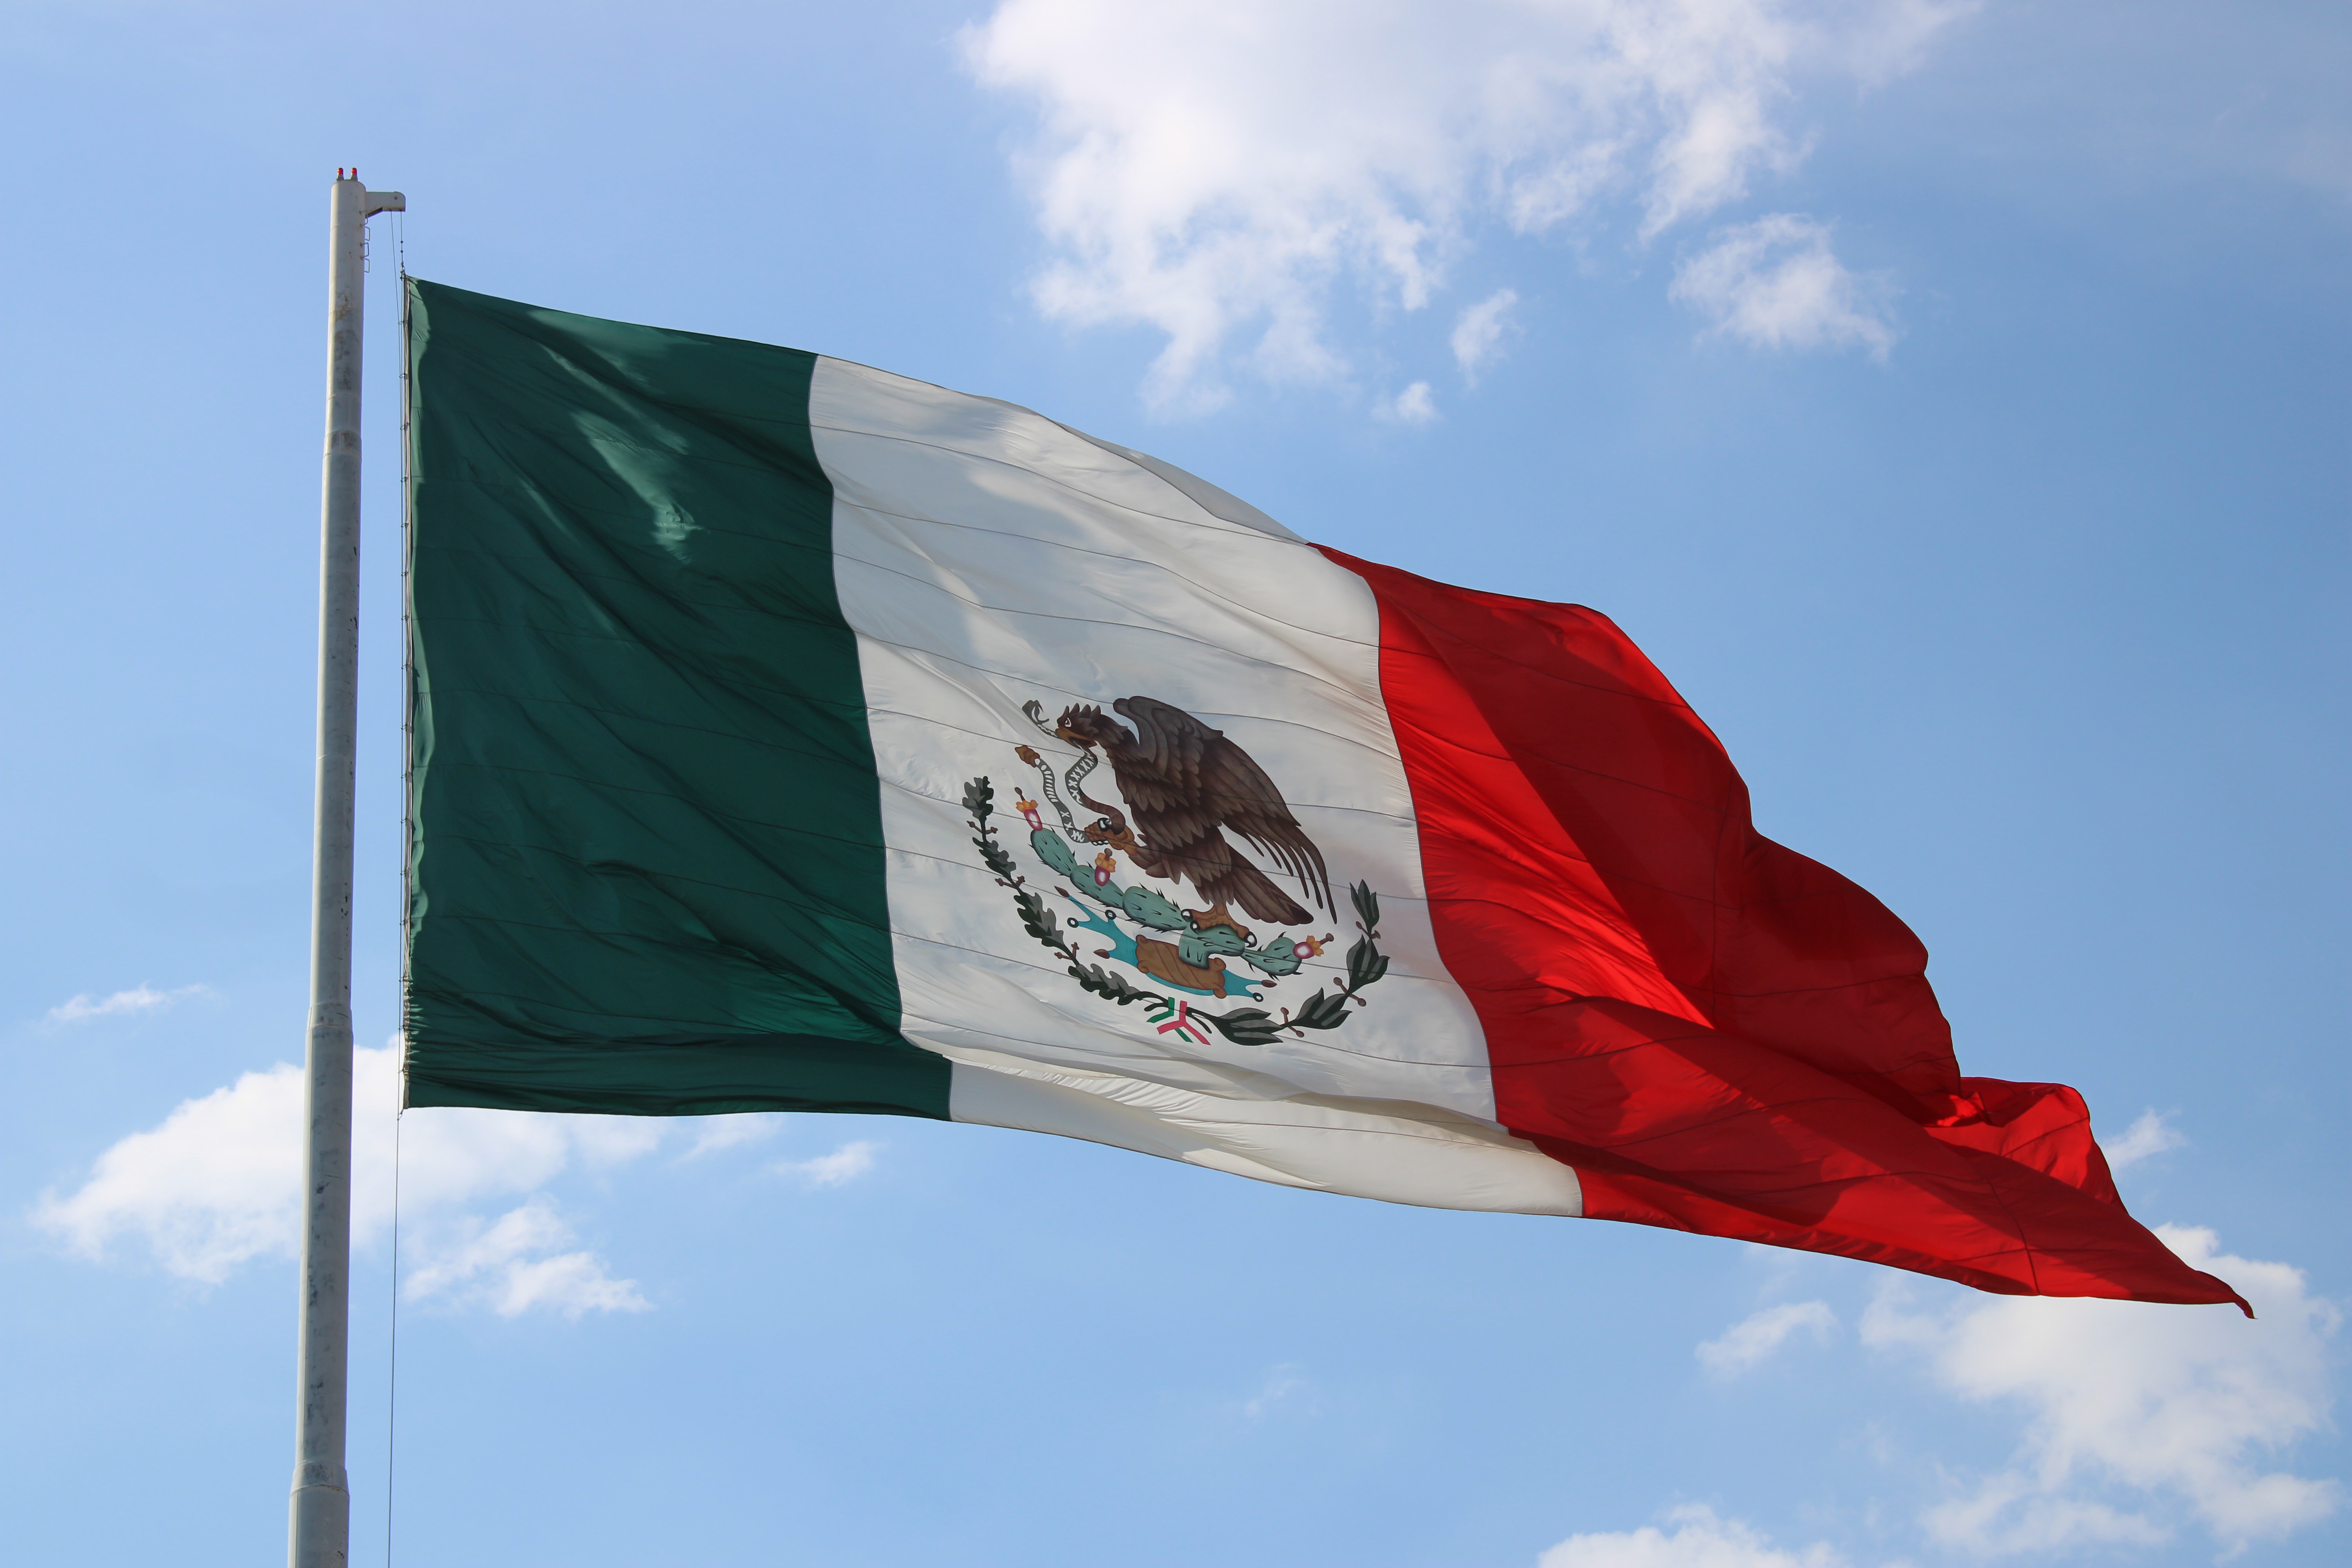 Mexico's flag flying on a flag pole with a blue sky in the background